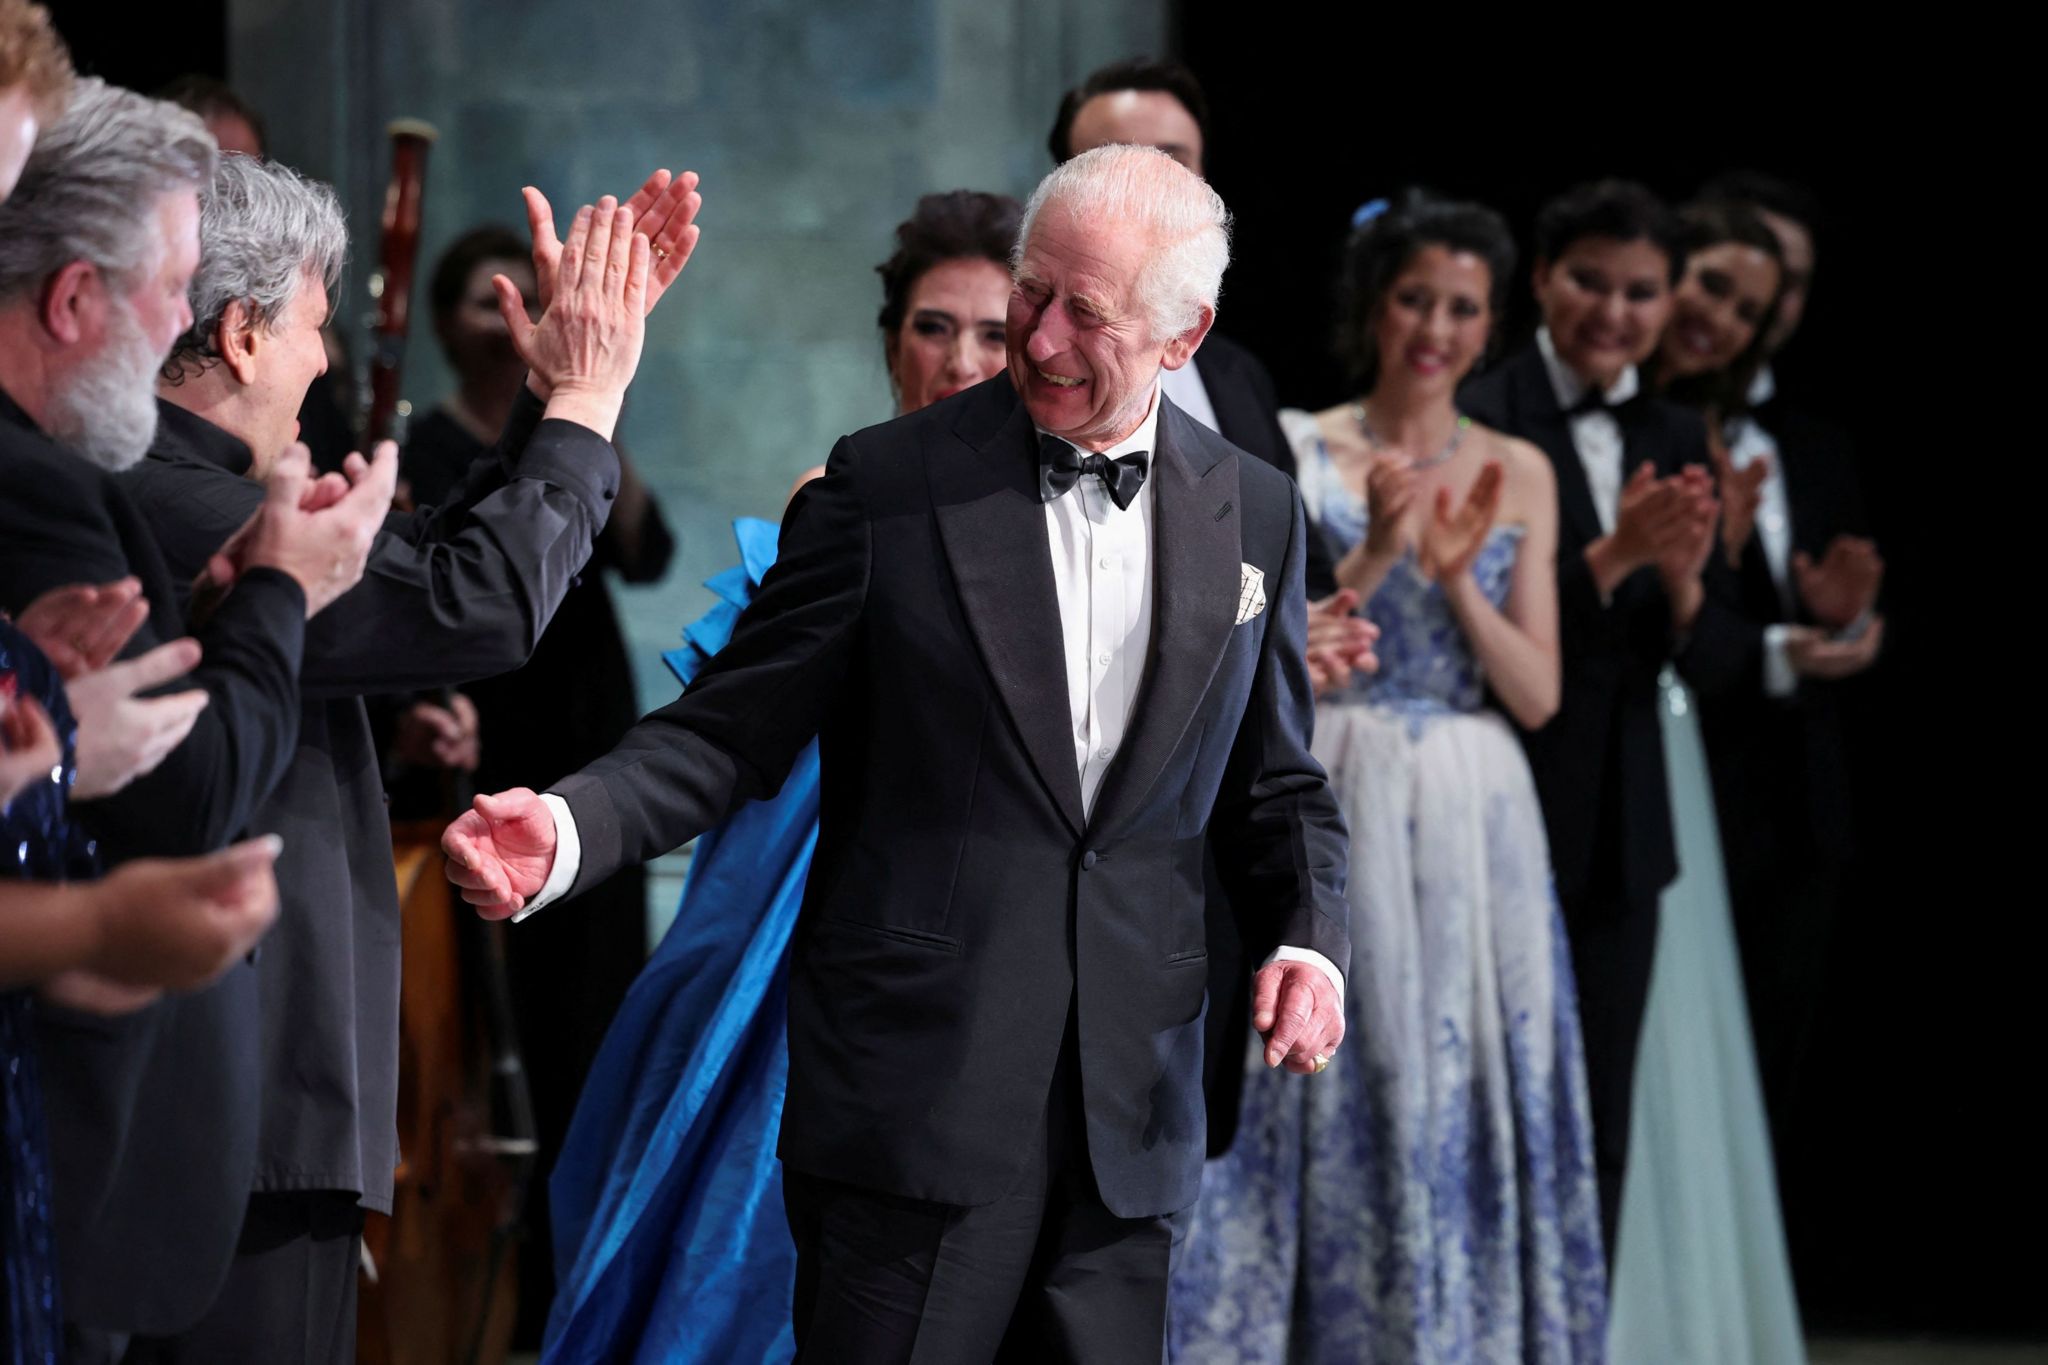 King Charles III meets with the cast of a special Gala performance at the Royal Opera House in London in tribute to out-going music director Sir Antonio Pappano.